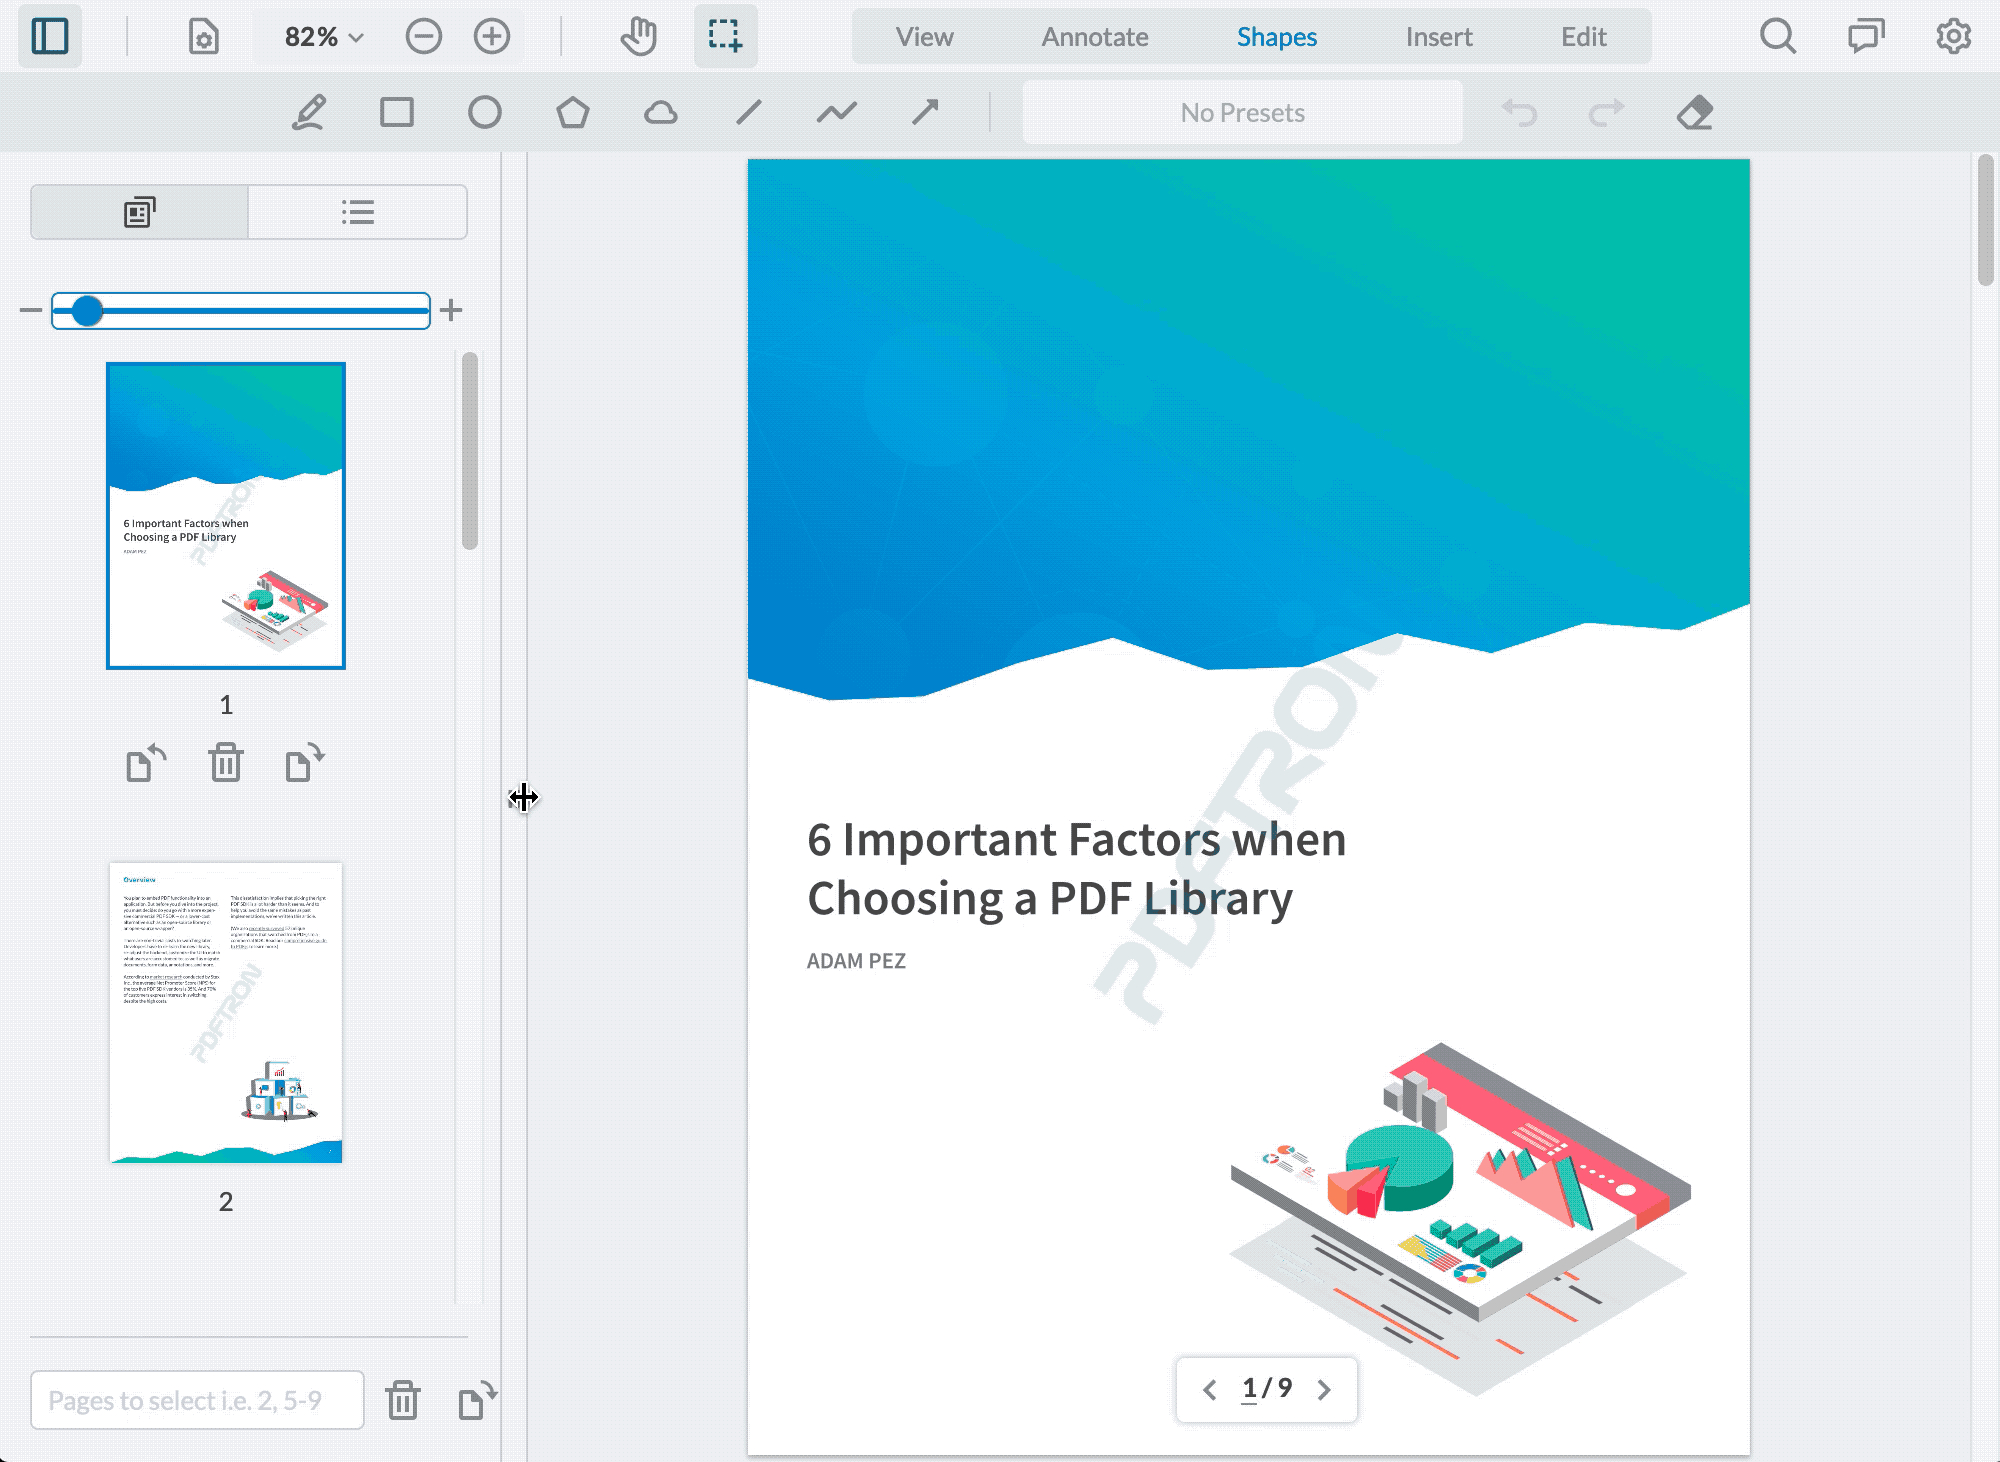 Users can change the zoom level on thumbnails to improve the experience around page manipulation and navigating long documents.